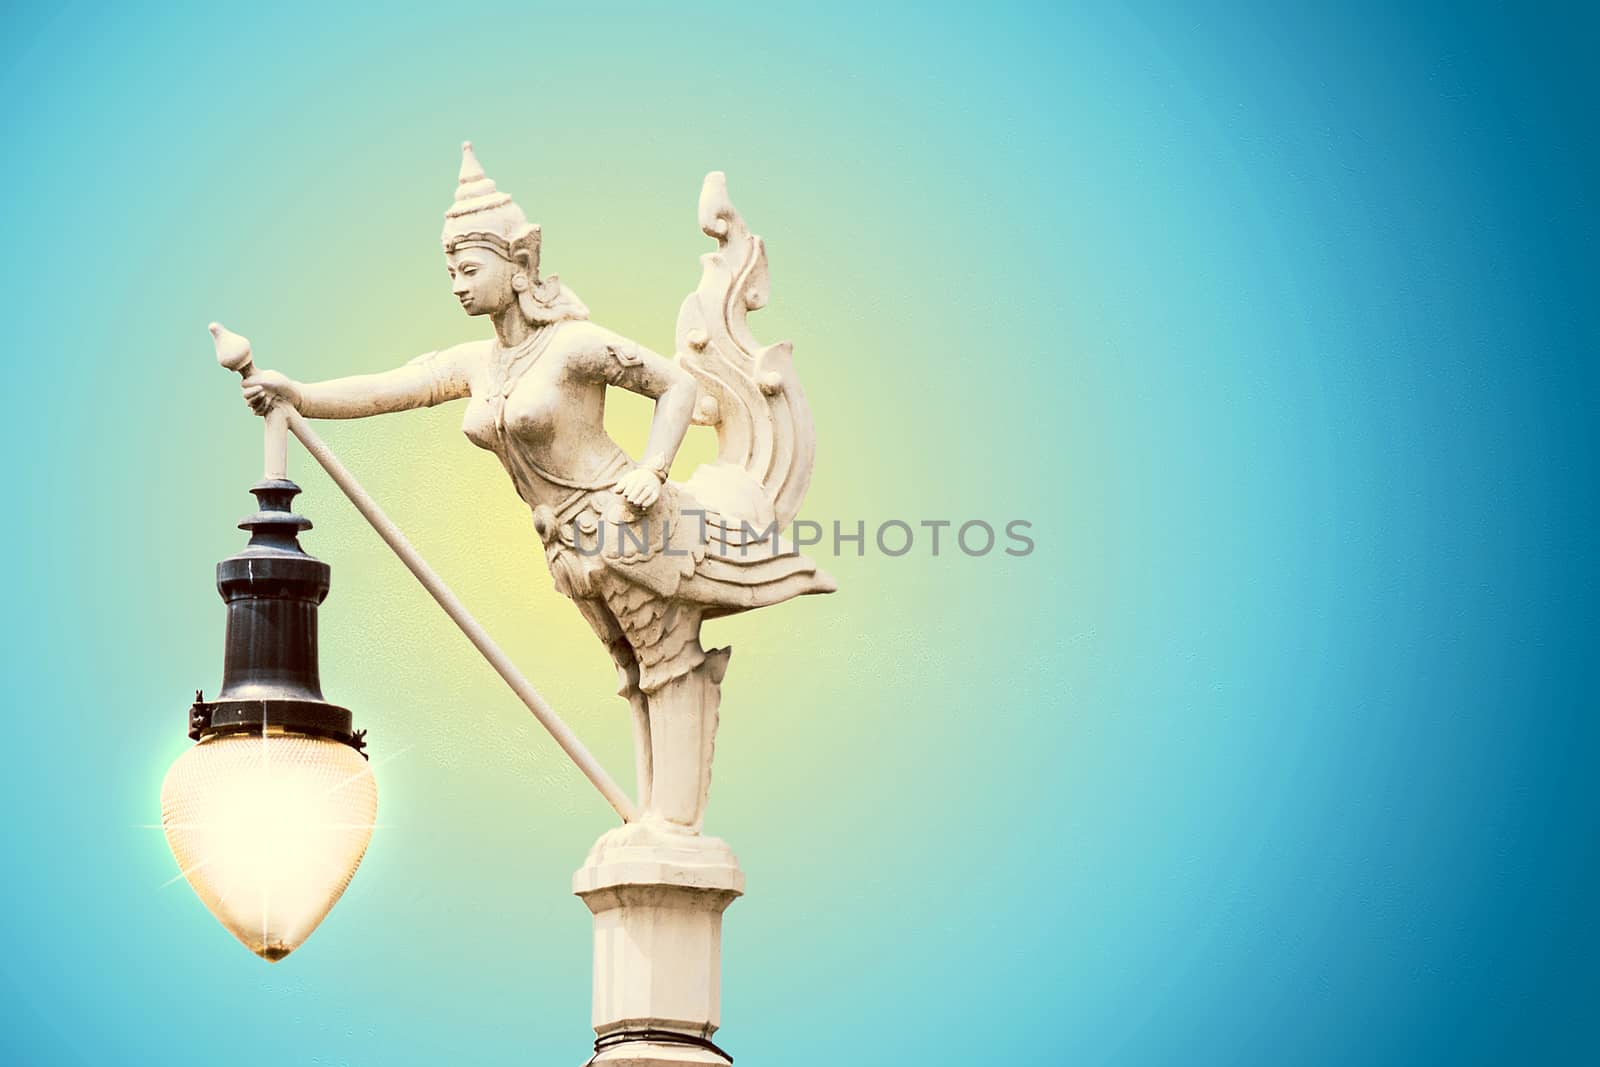 Sculture of woman and bird is a lantern 







ancient, animal, antique, architecture, art, artistic, asia, asian, Background, beautiful, culture, decor, decoration, decorative, design, destination, dynasty, exterior, famous, guard, guardian, historic, history, imperial, monument, museum, old, oriental, palace, past, power, religion, religious, rock, sculpture, statue, stone, summer, symbol, tourism, tradition, traditional, travel, vintage, bird, lamp, lantern